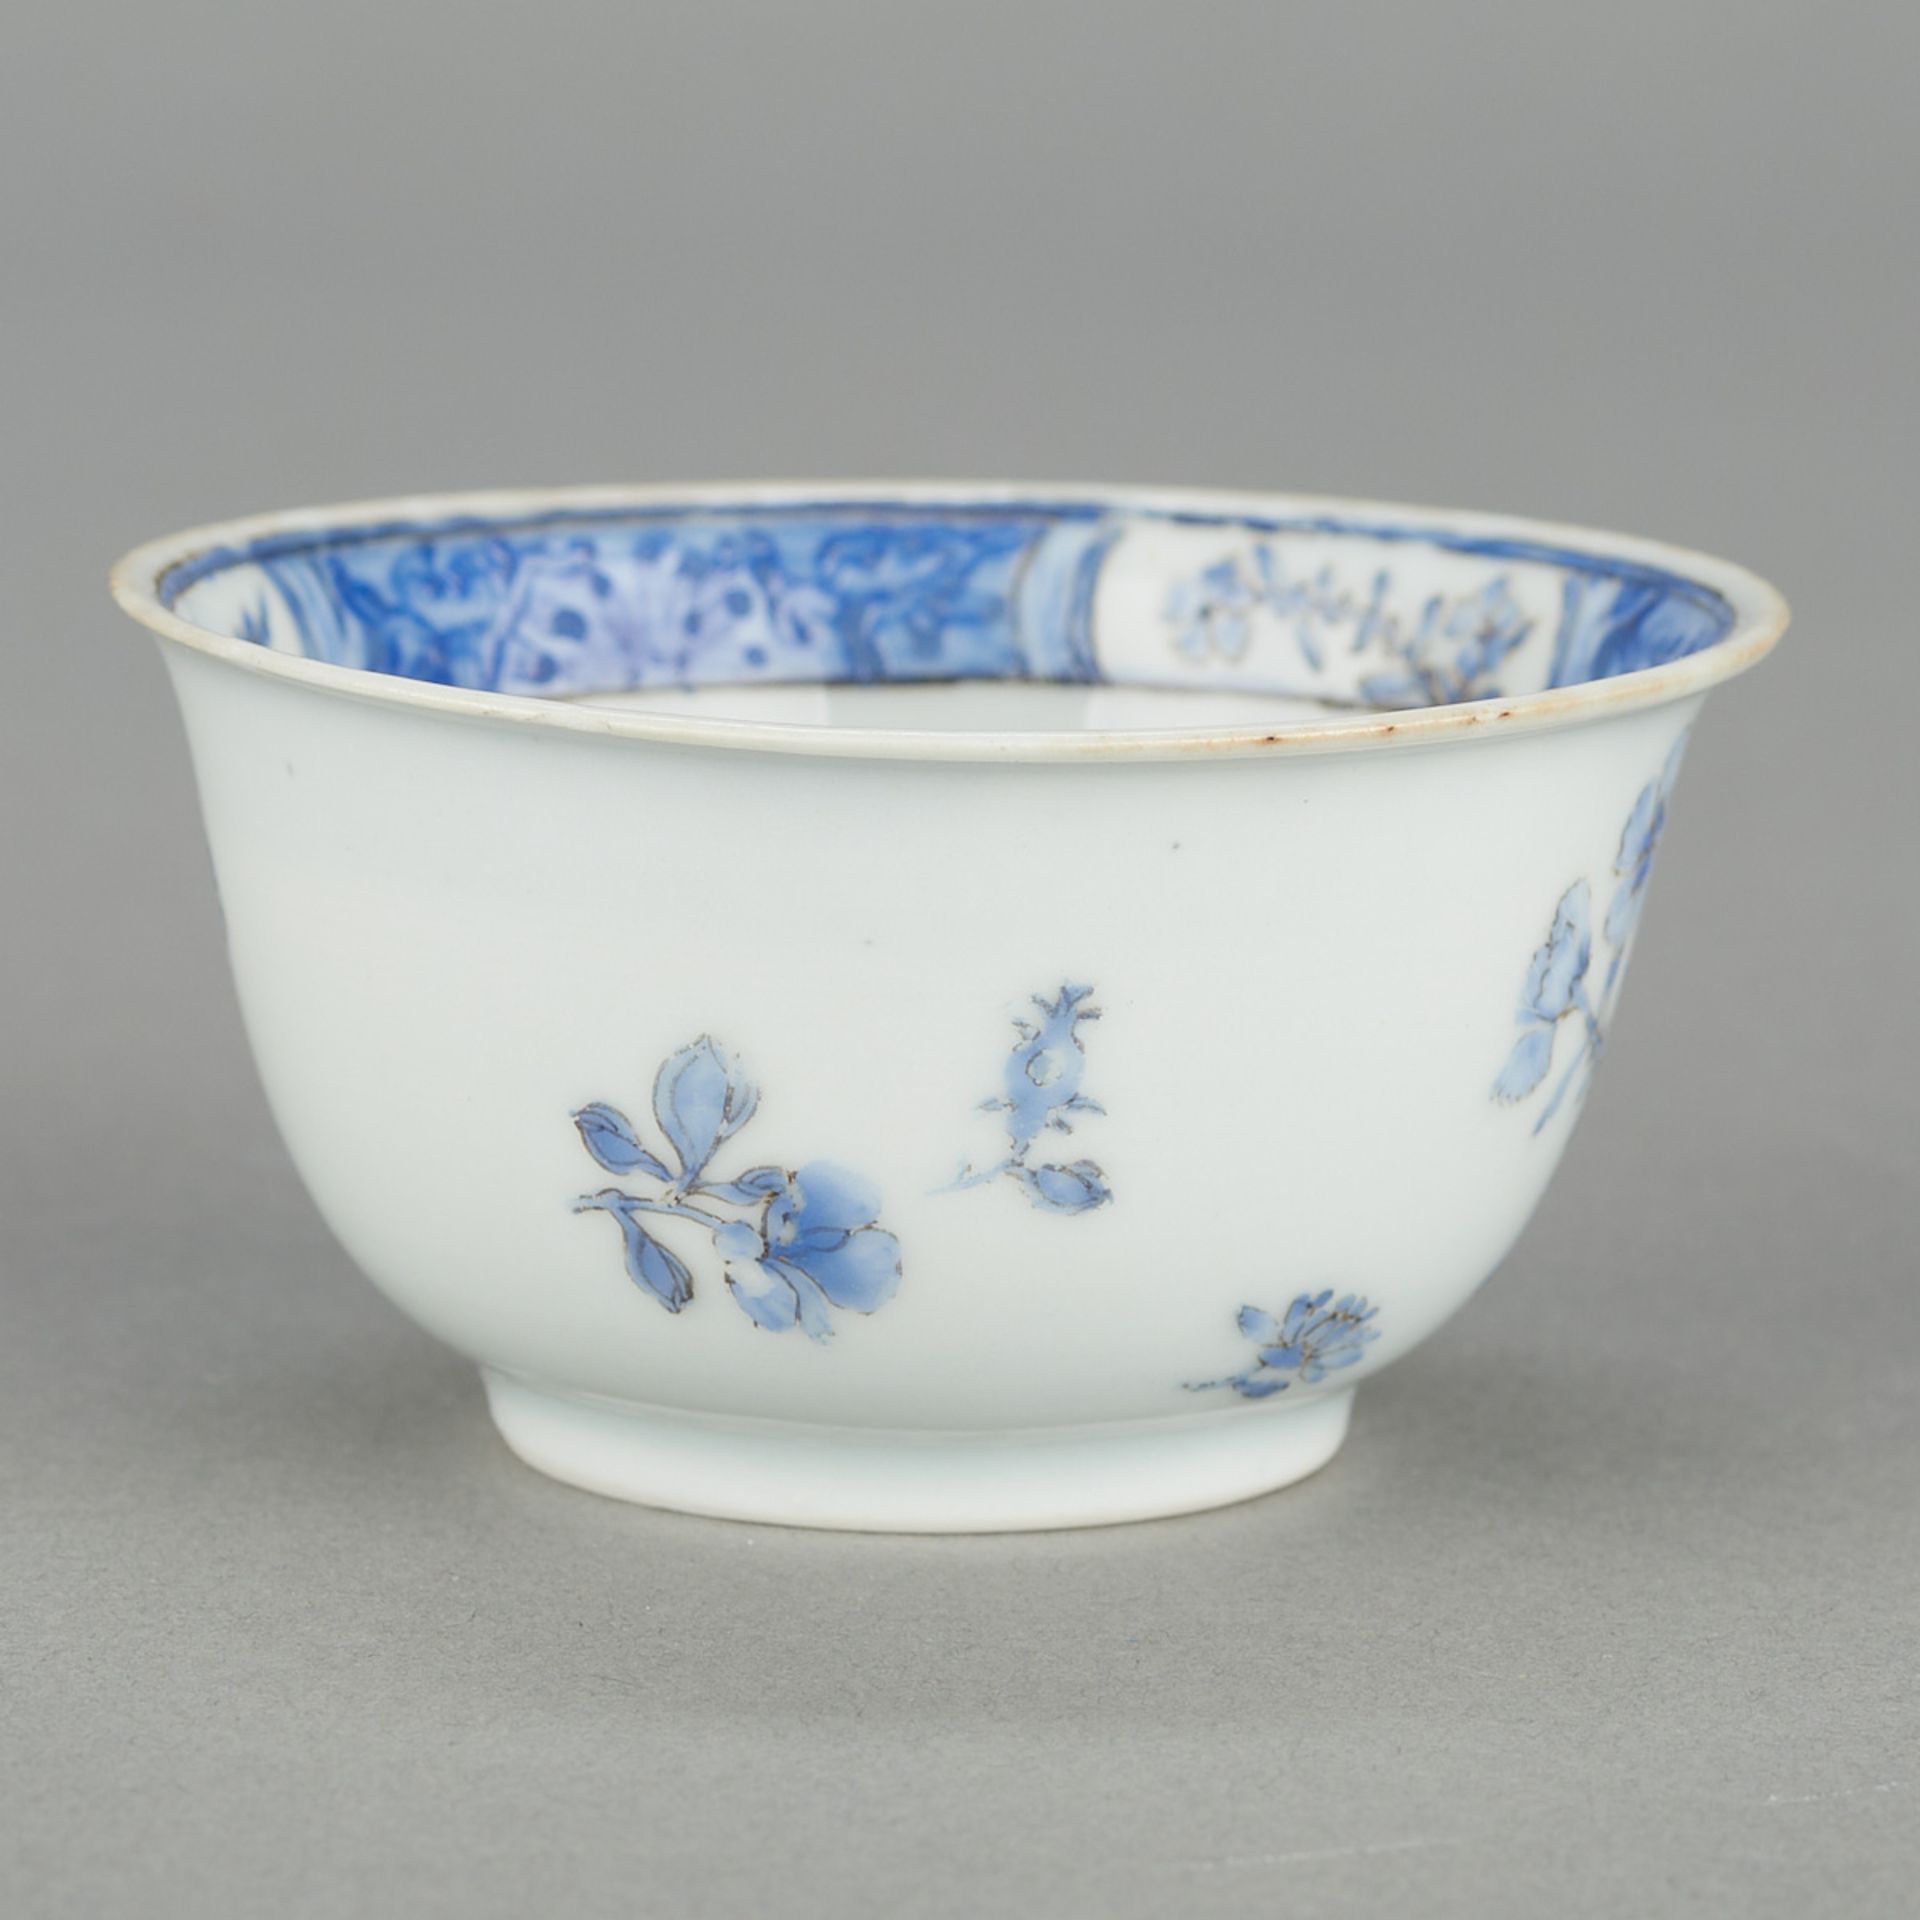 18th c. Chinese Porcelain Tea Bowl - Image 5 of 8